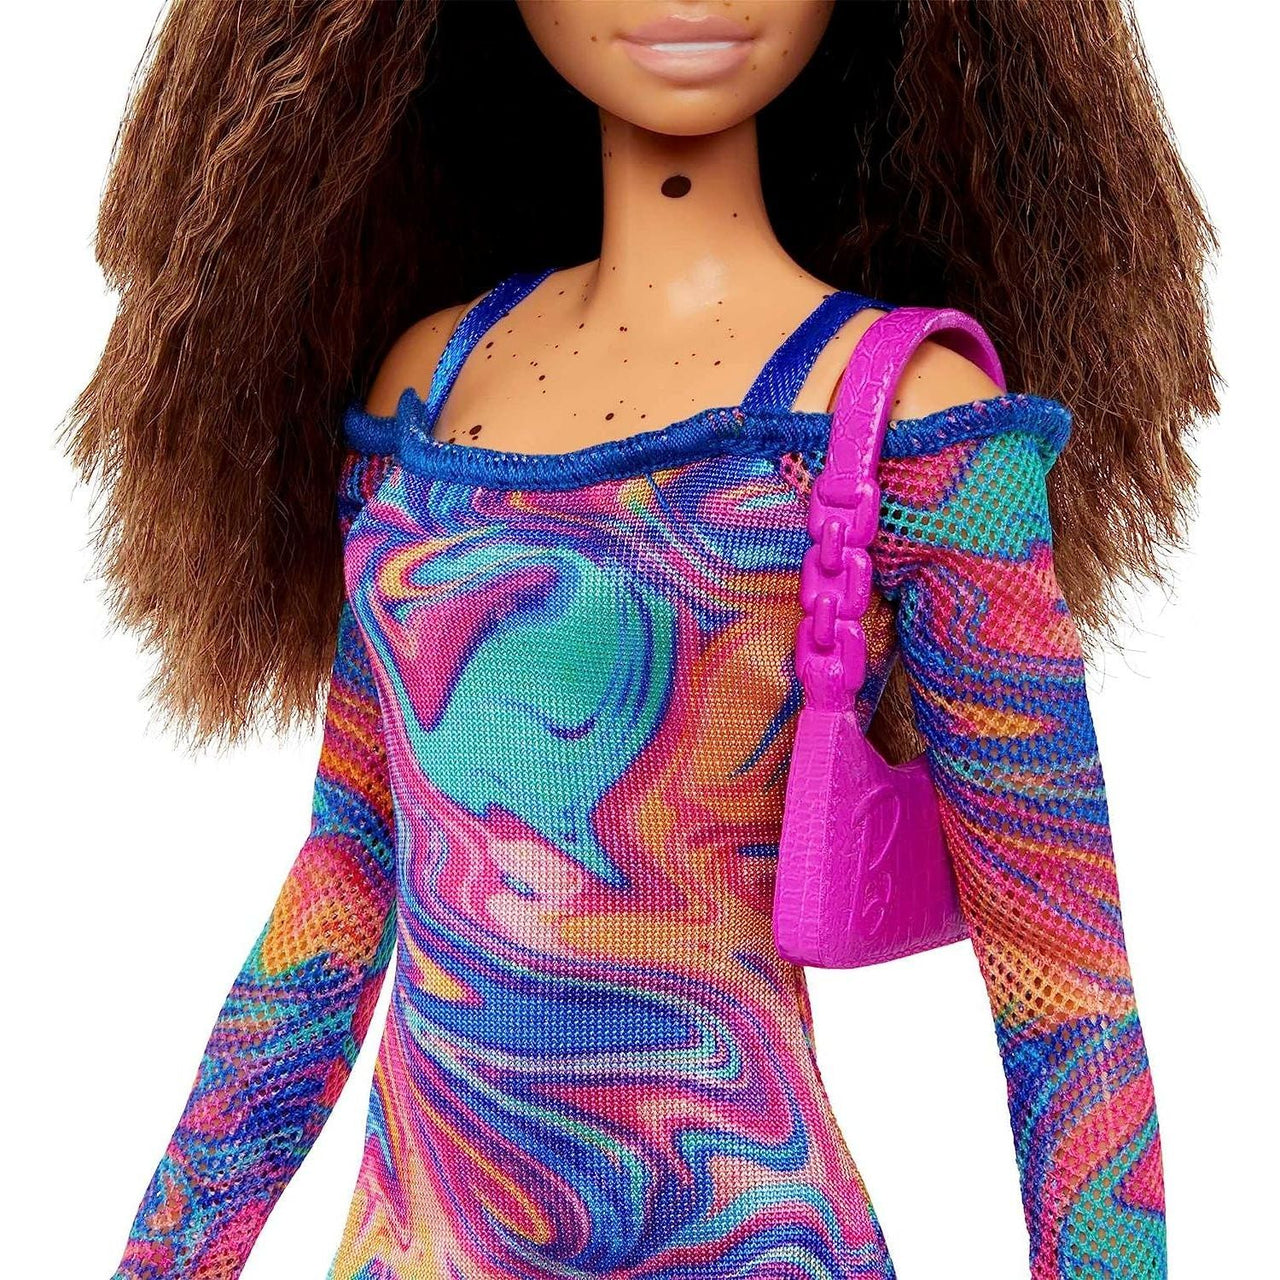 Barbie Fashionista Doll 206 - Crimped Hair and Moles/Freckles Barbie